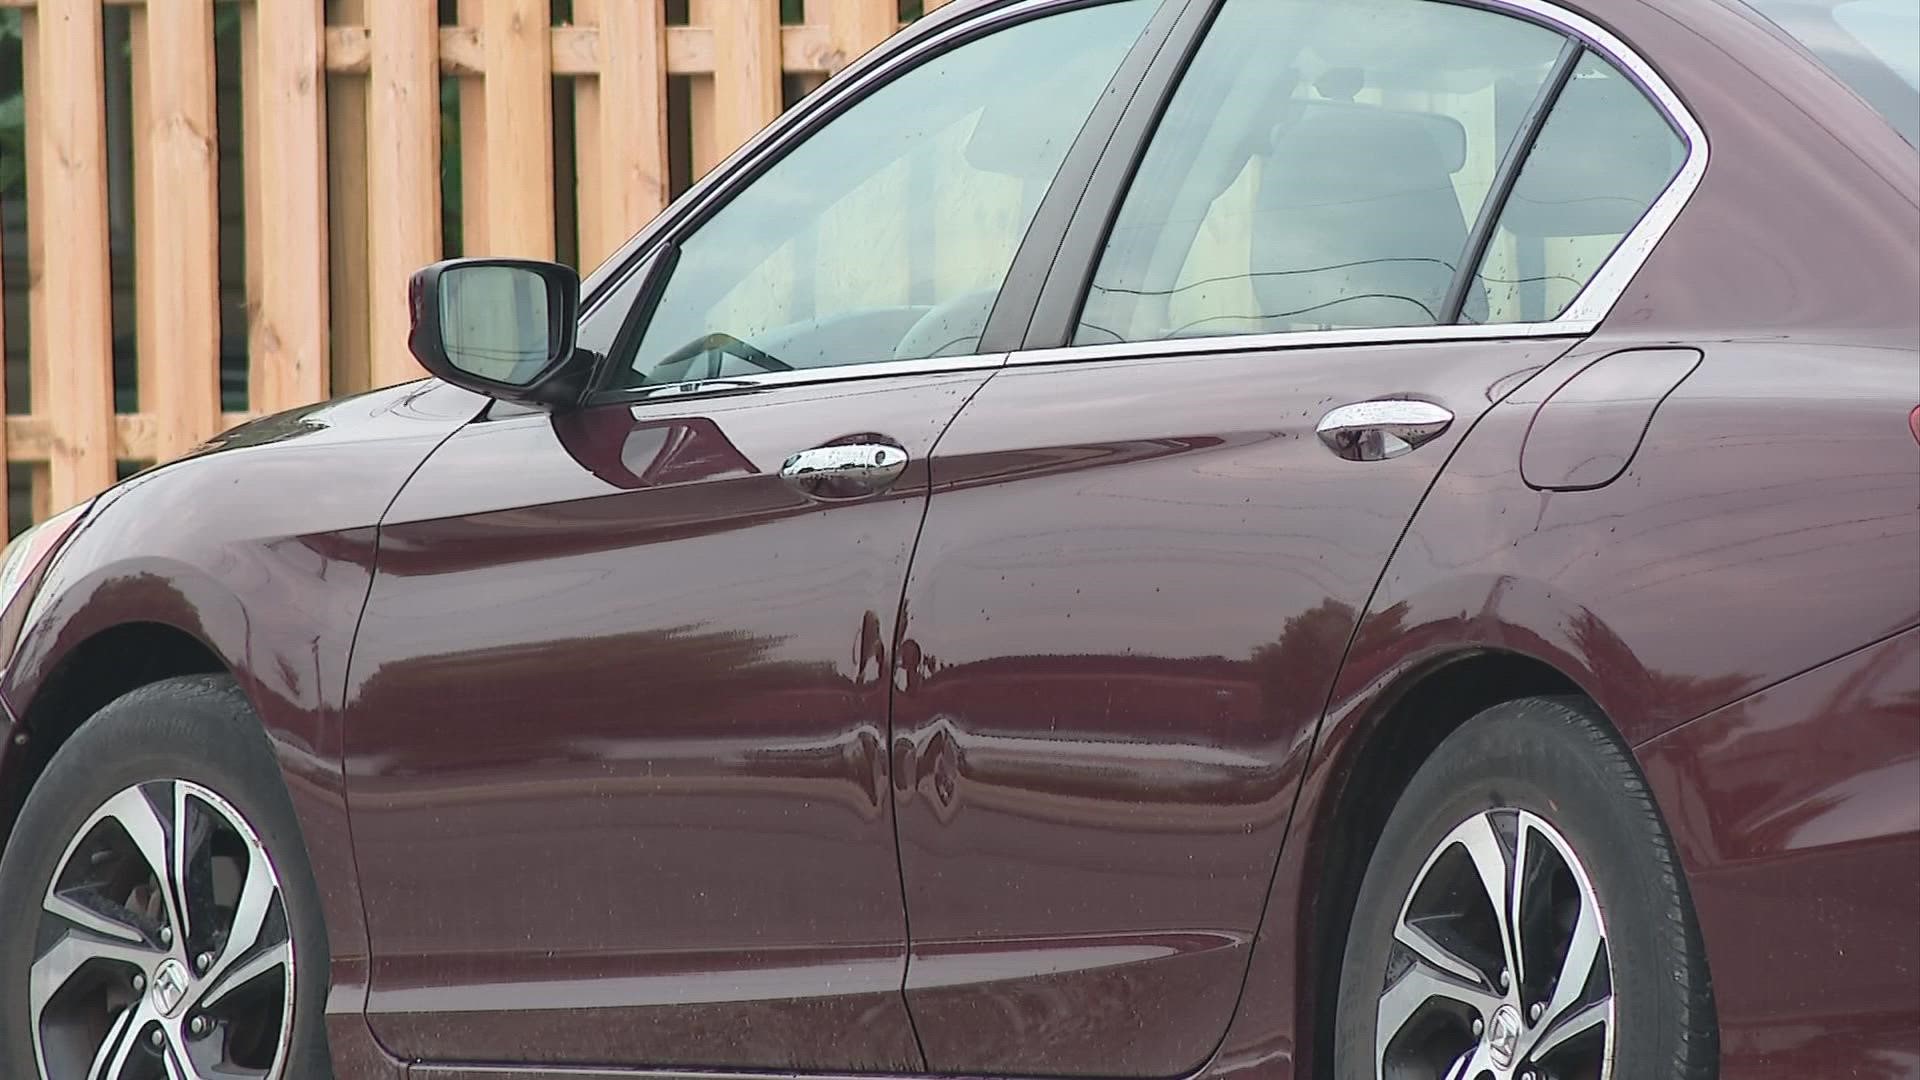 The Fairfield County Sheriff's Office said in the last two months there have been nine stolen vehicles, with eight of them being in the northwest part of the county.